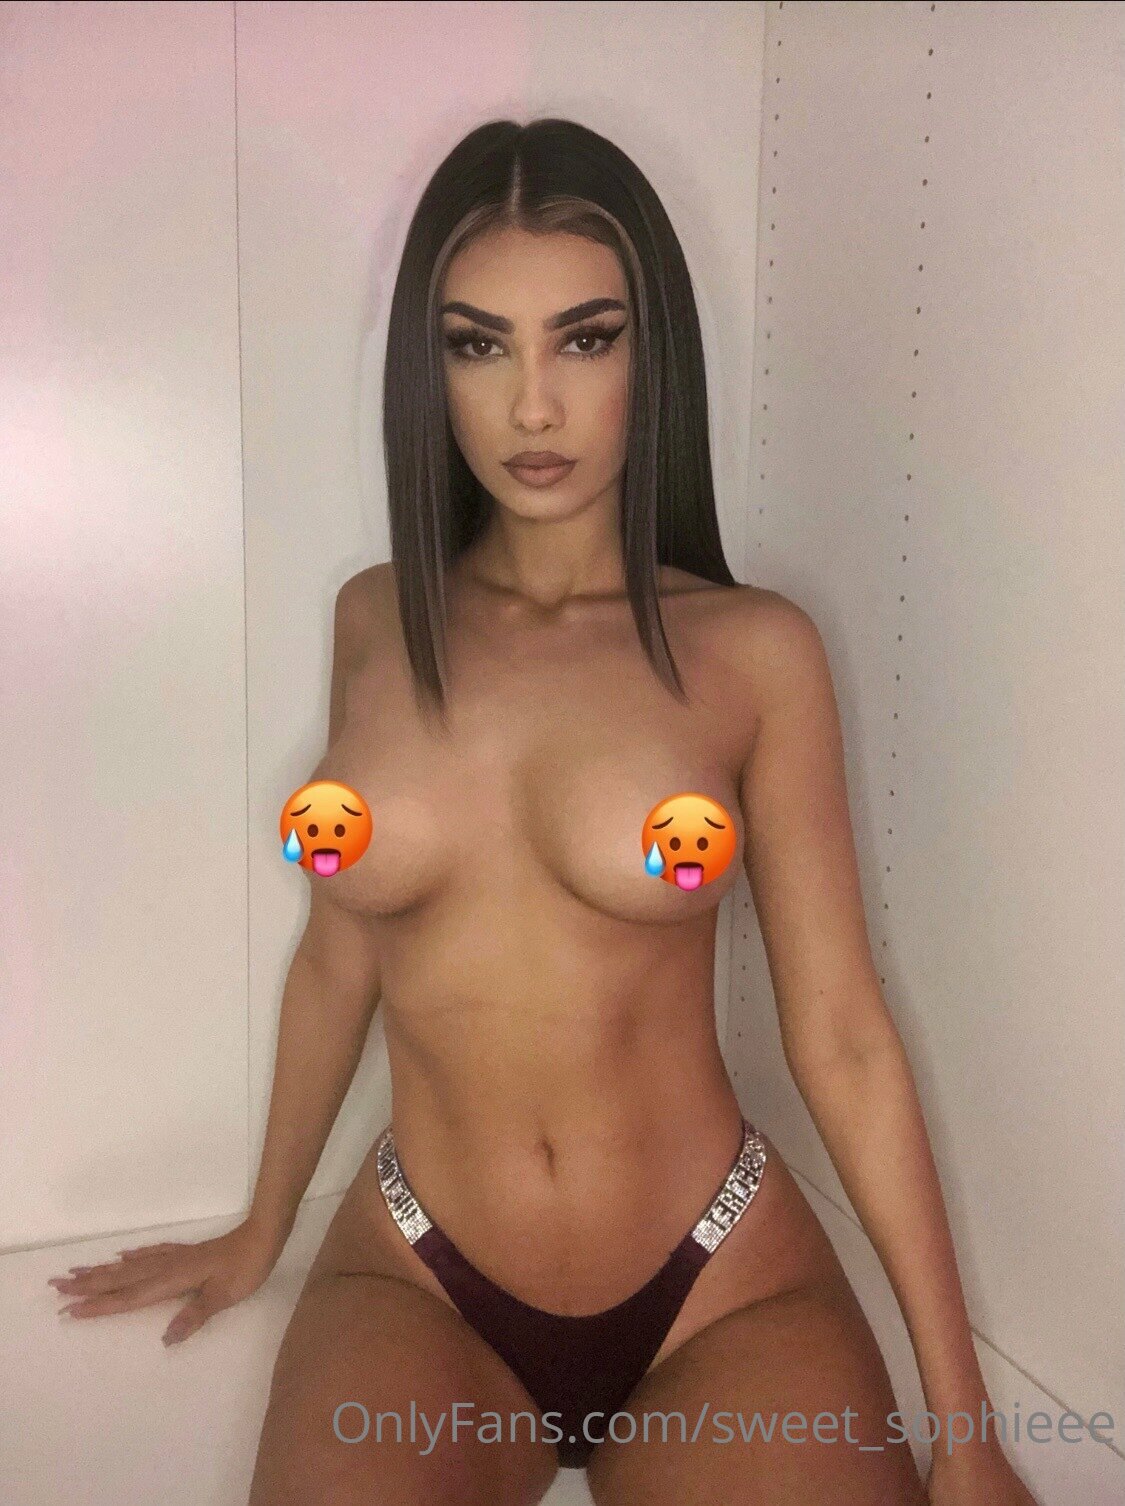 Sophie_foxiee only fans